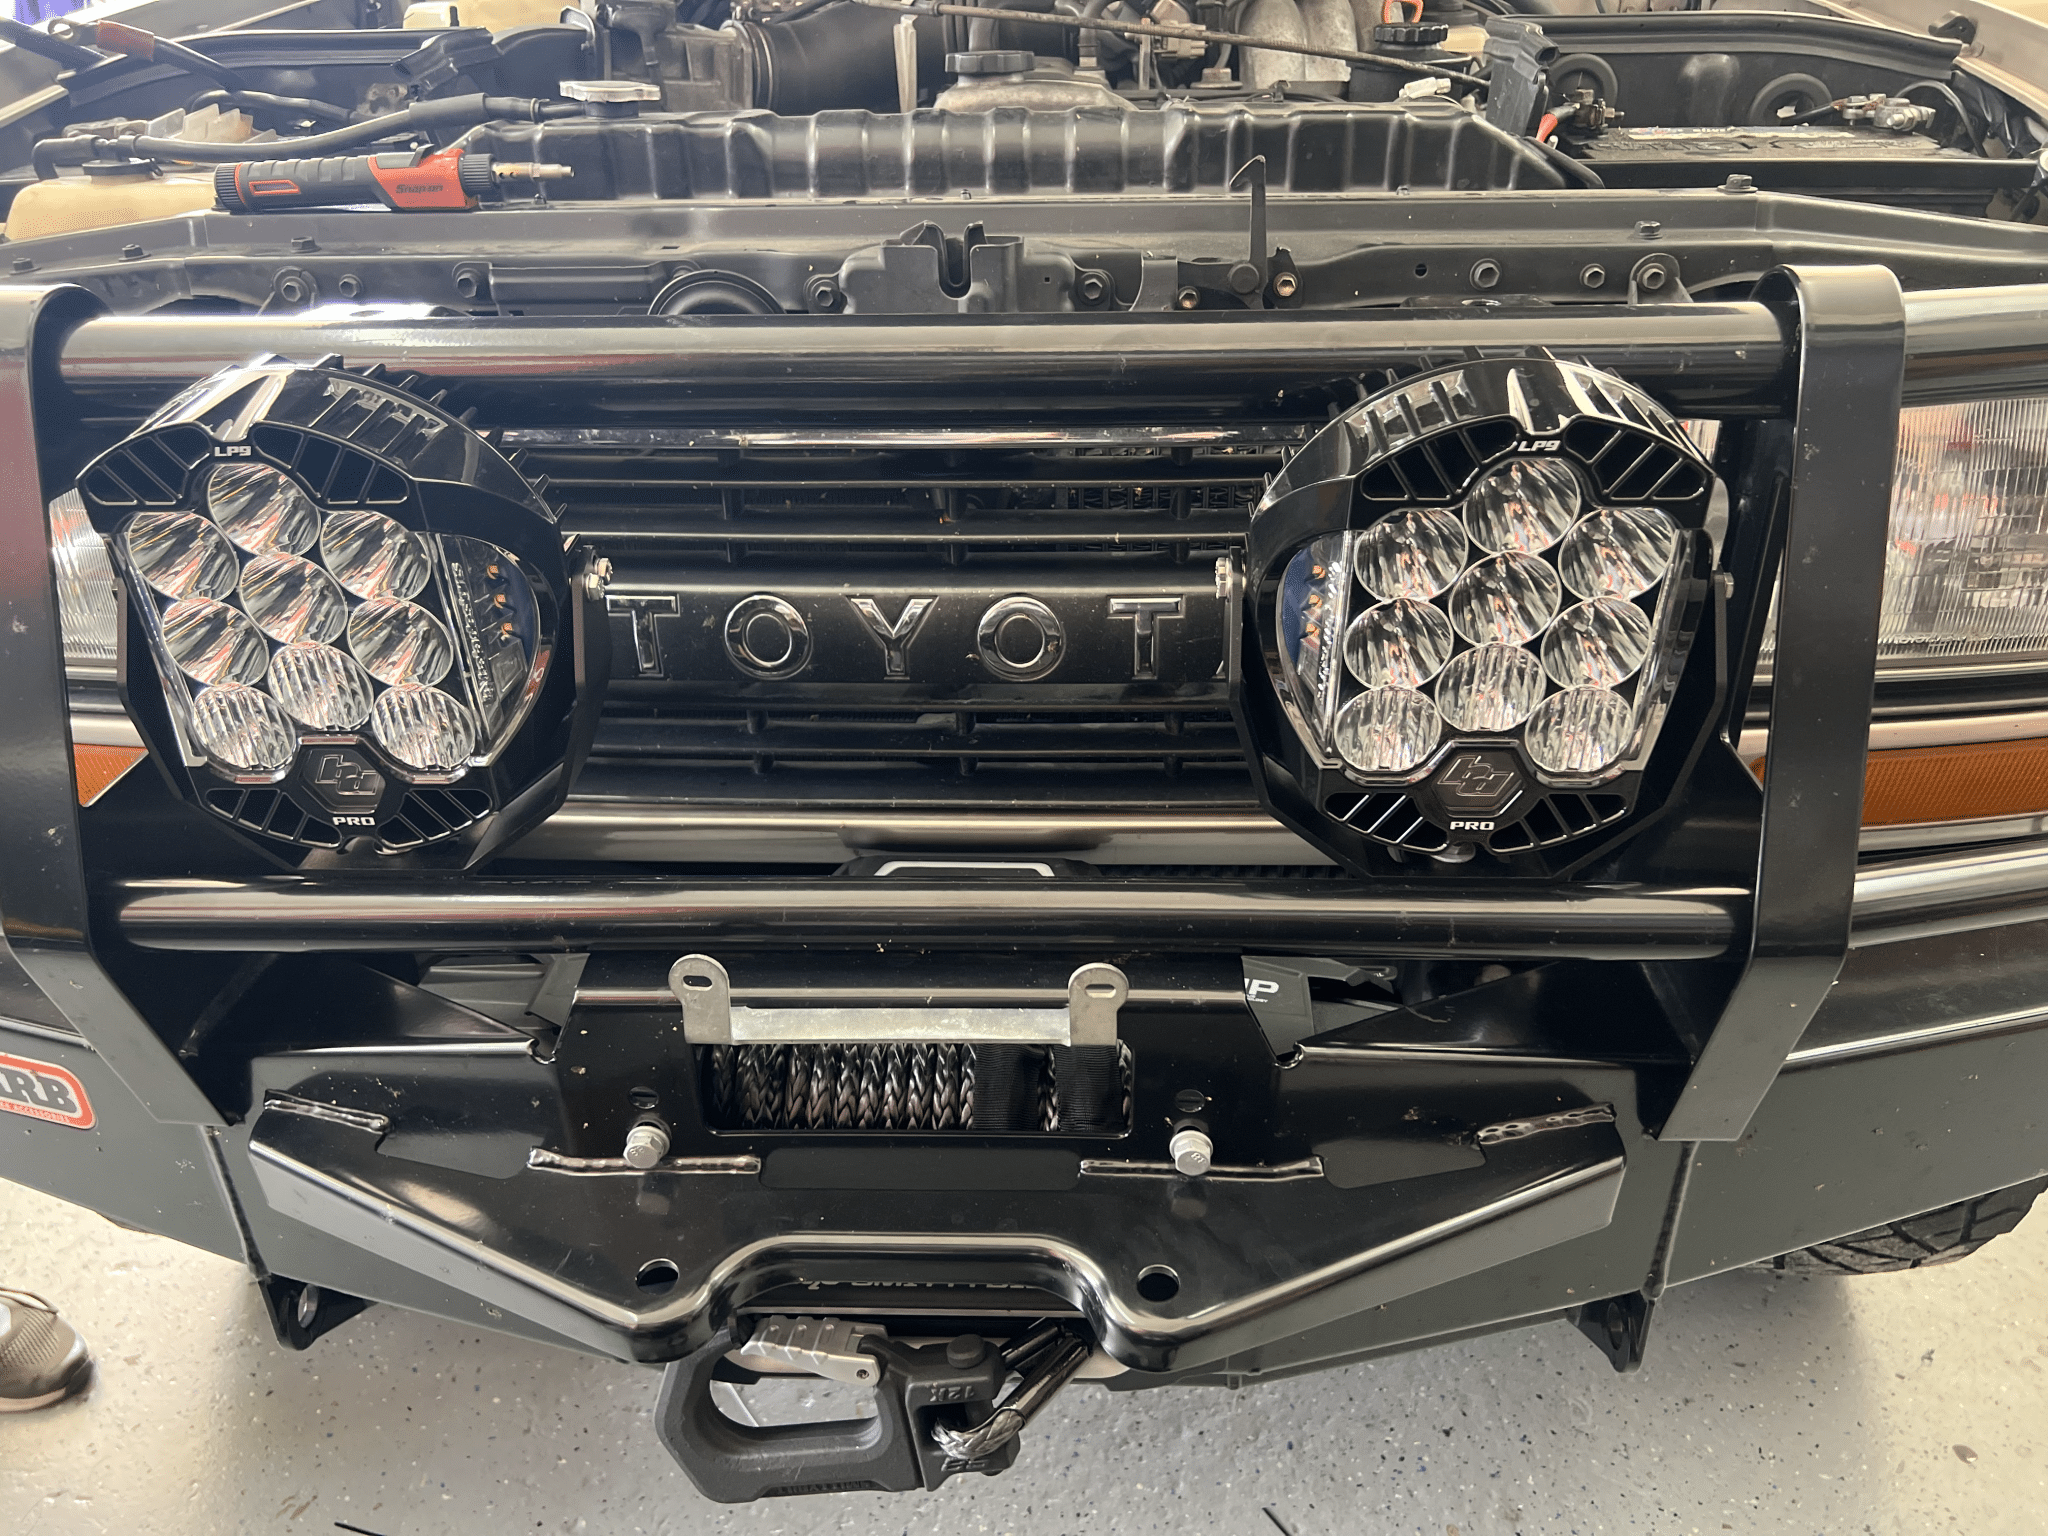 Custom lighting package added to truck's front bumper